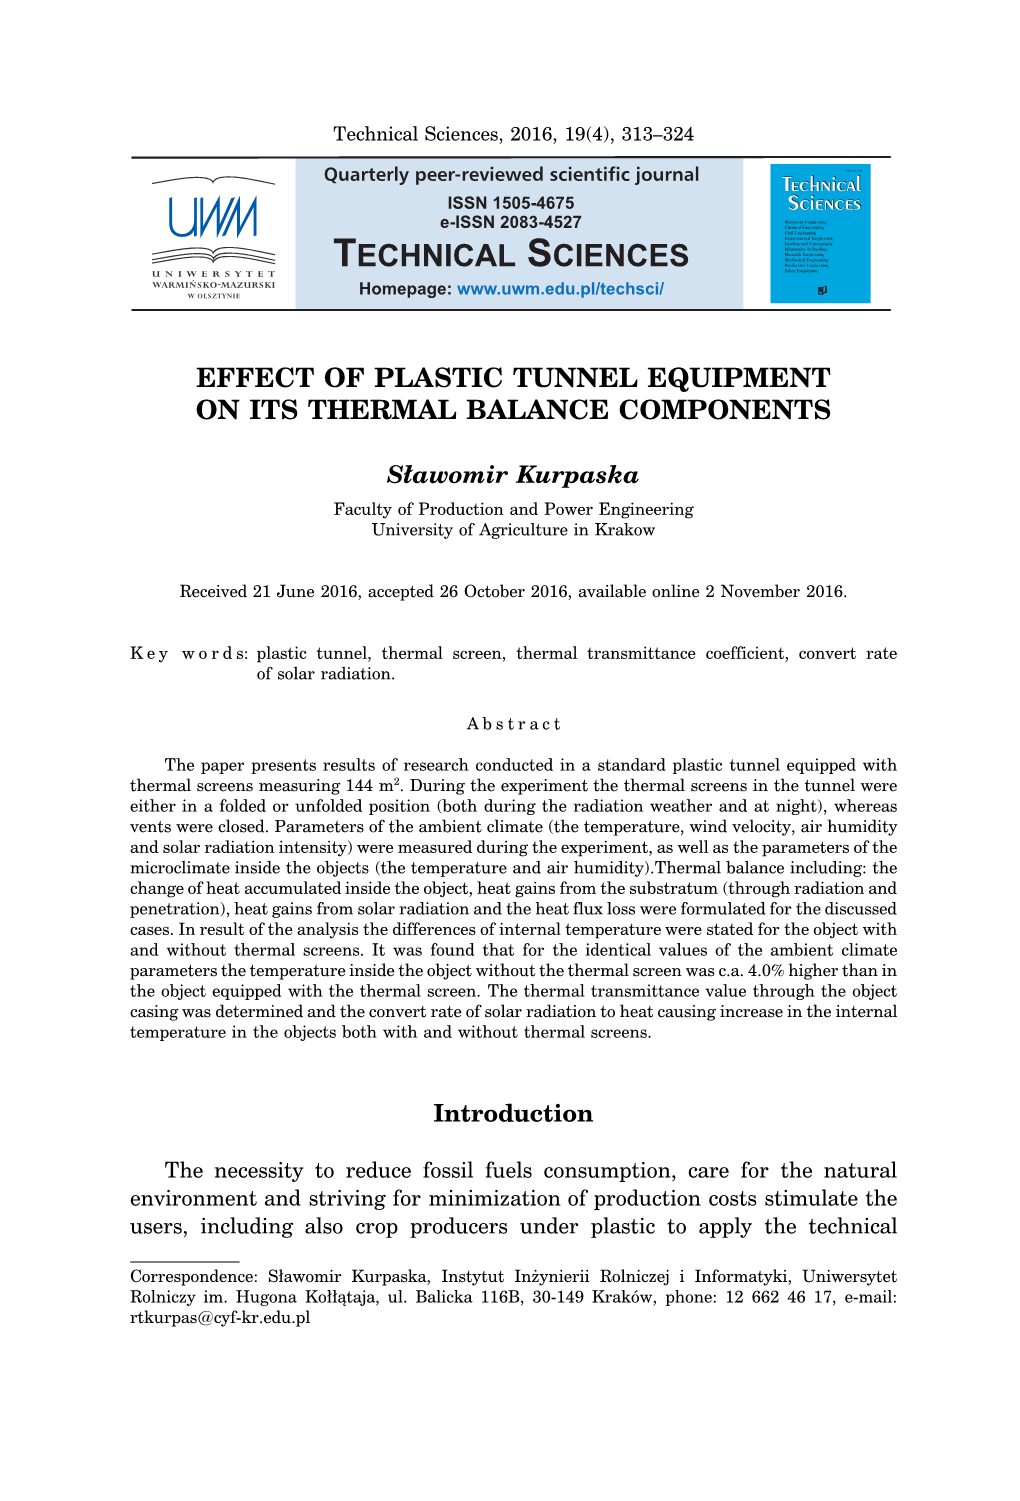 Effect of Plastic Tunnel Equipment on Its Thermal Balance Components